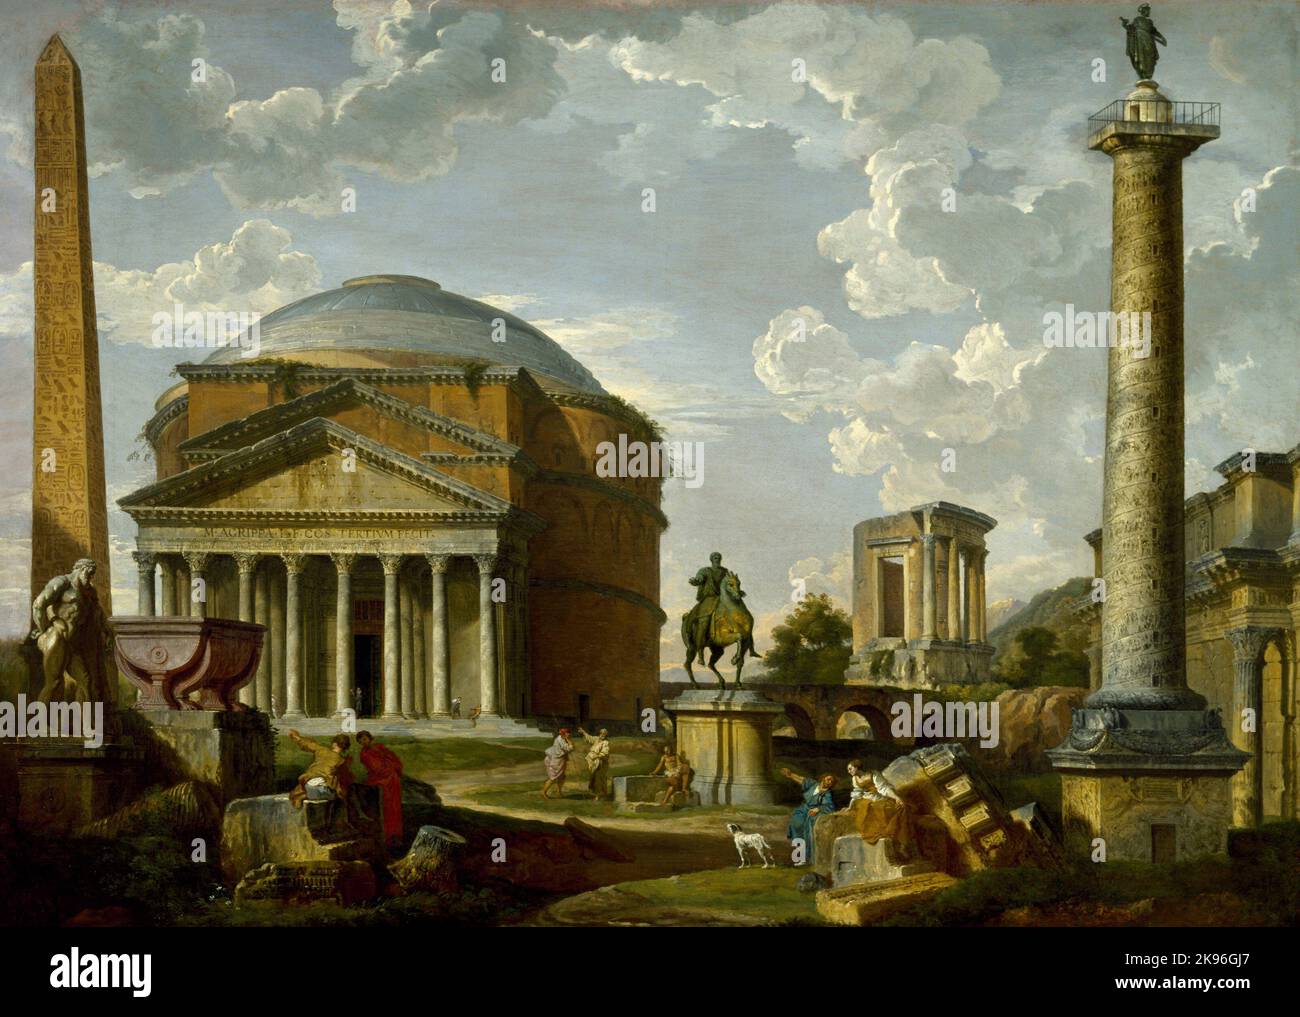 Fantasy View with the Pantheon and other Monuments of Ancient Rome (1737), Painting by Giovanni Paolo panini Foto Stock